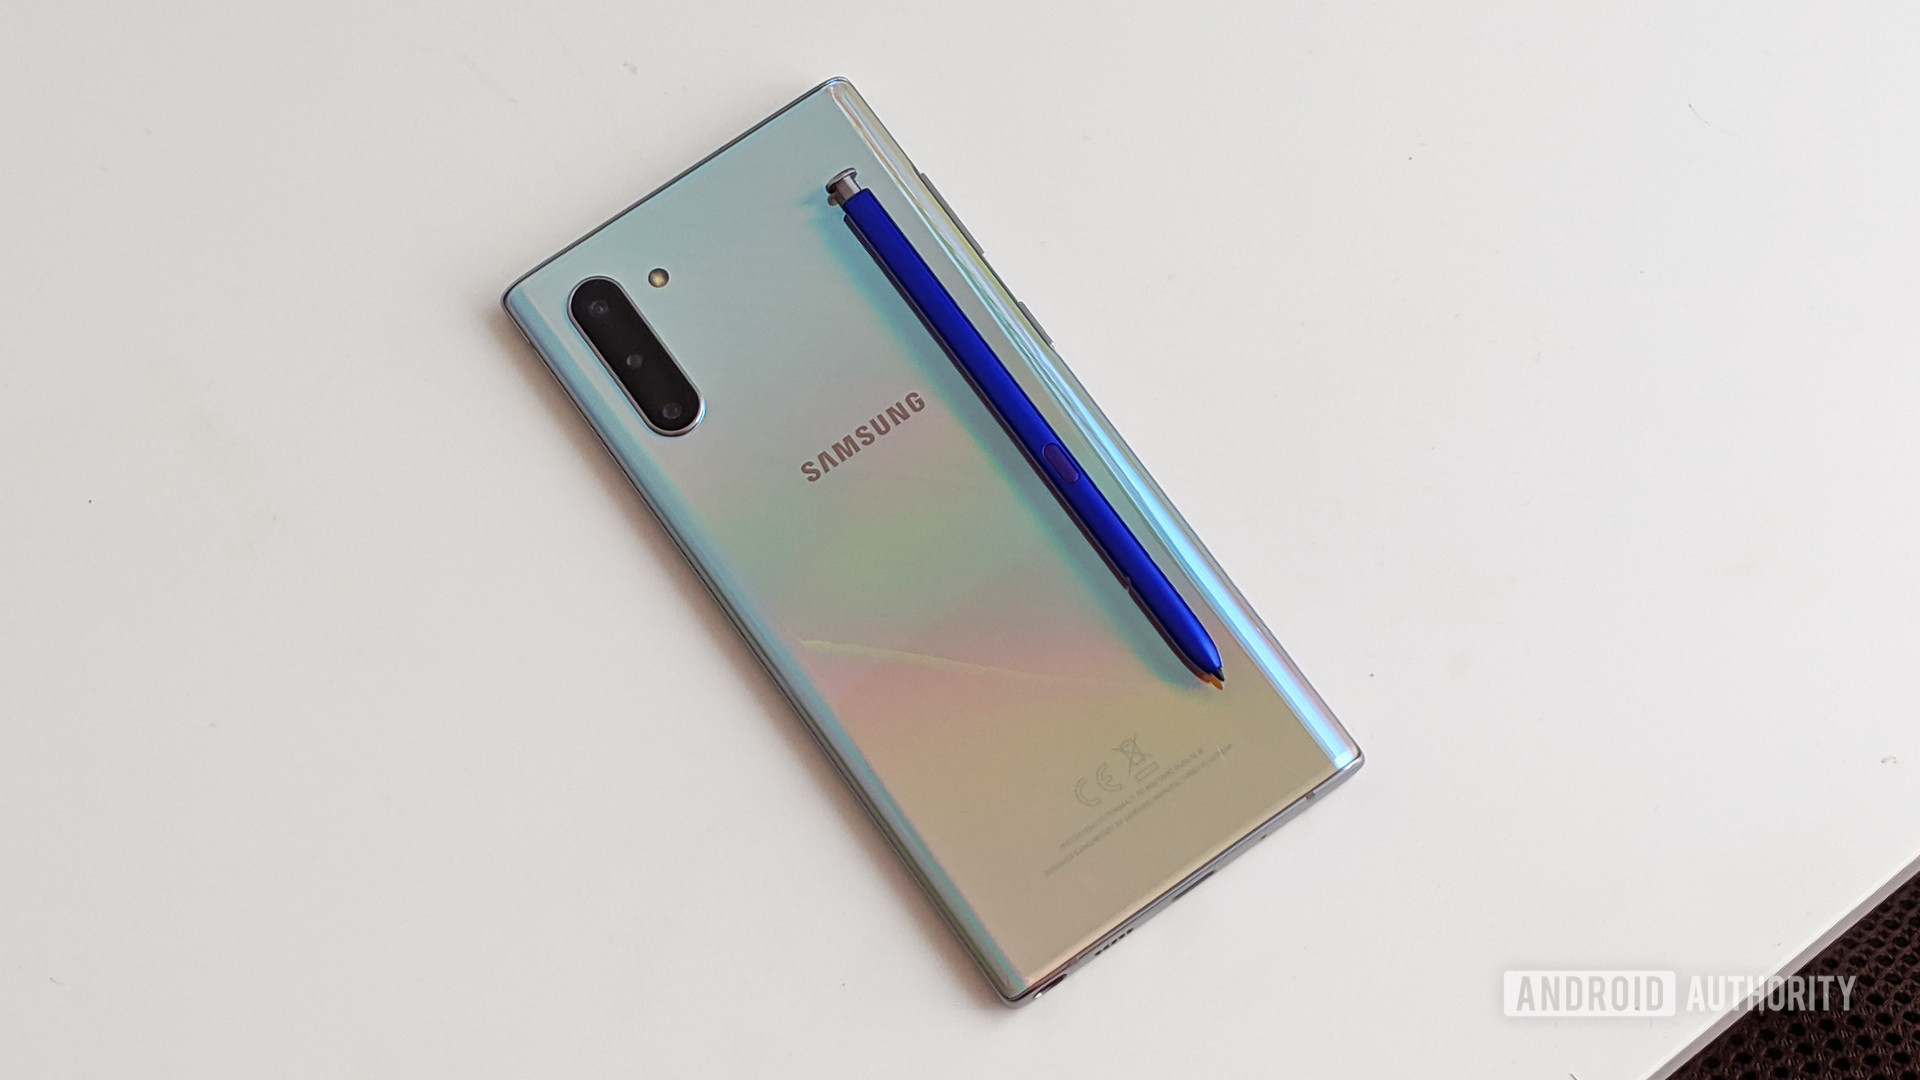 The Samsung Galaxy Note 10 sales are improved over the Note 9.